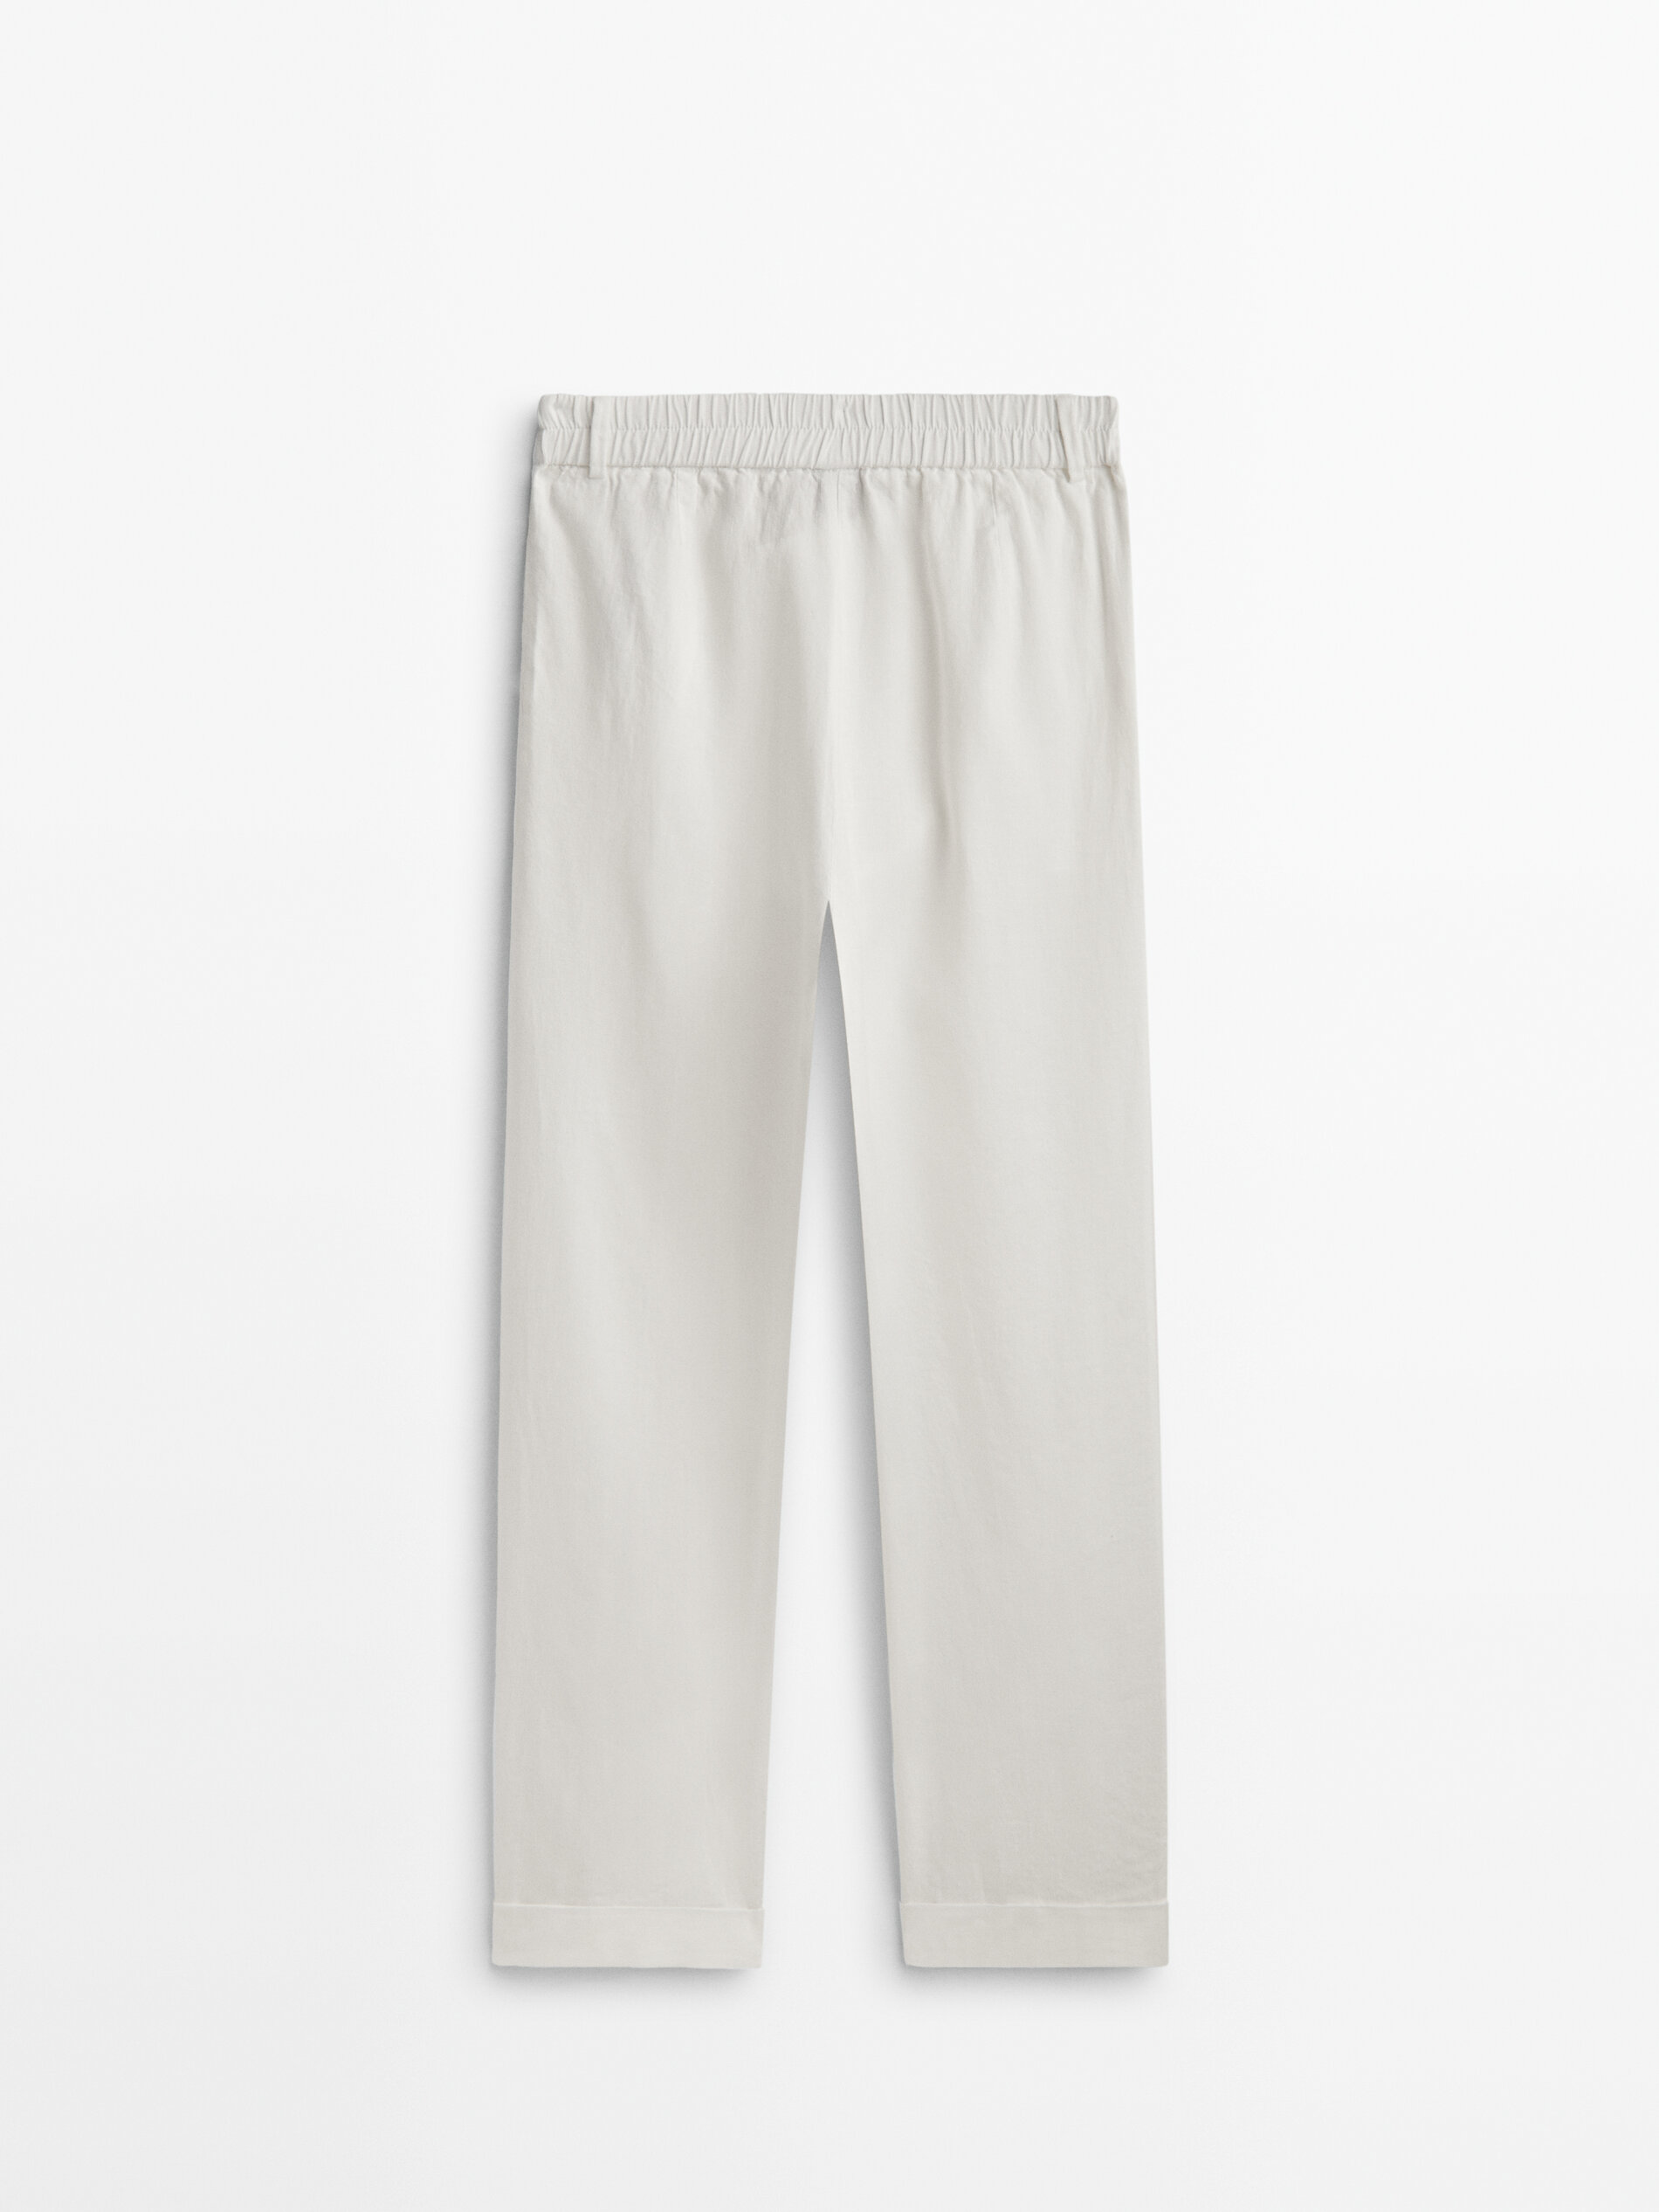 Linen and cotton blend trousers with double dart detail  Massimo Dutti